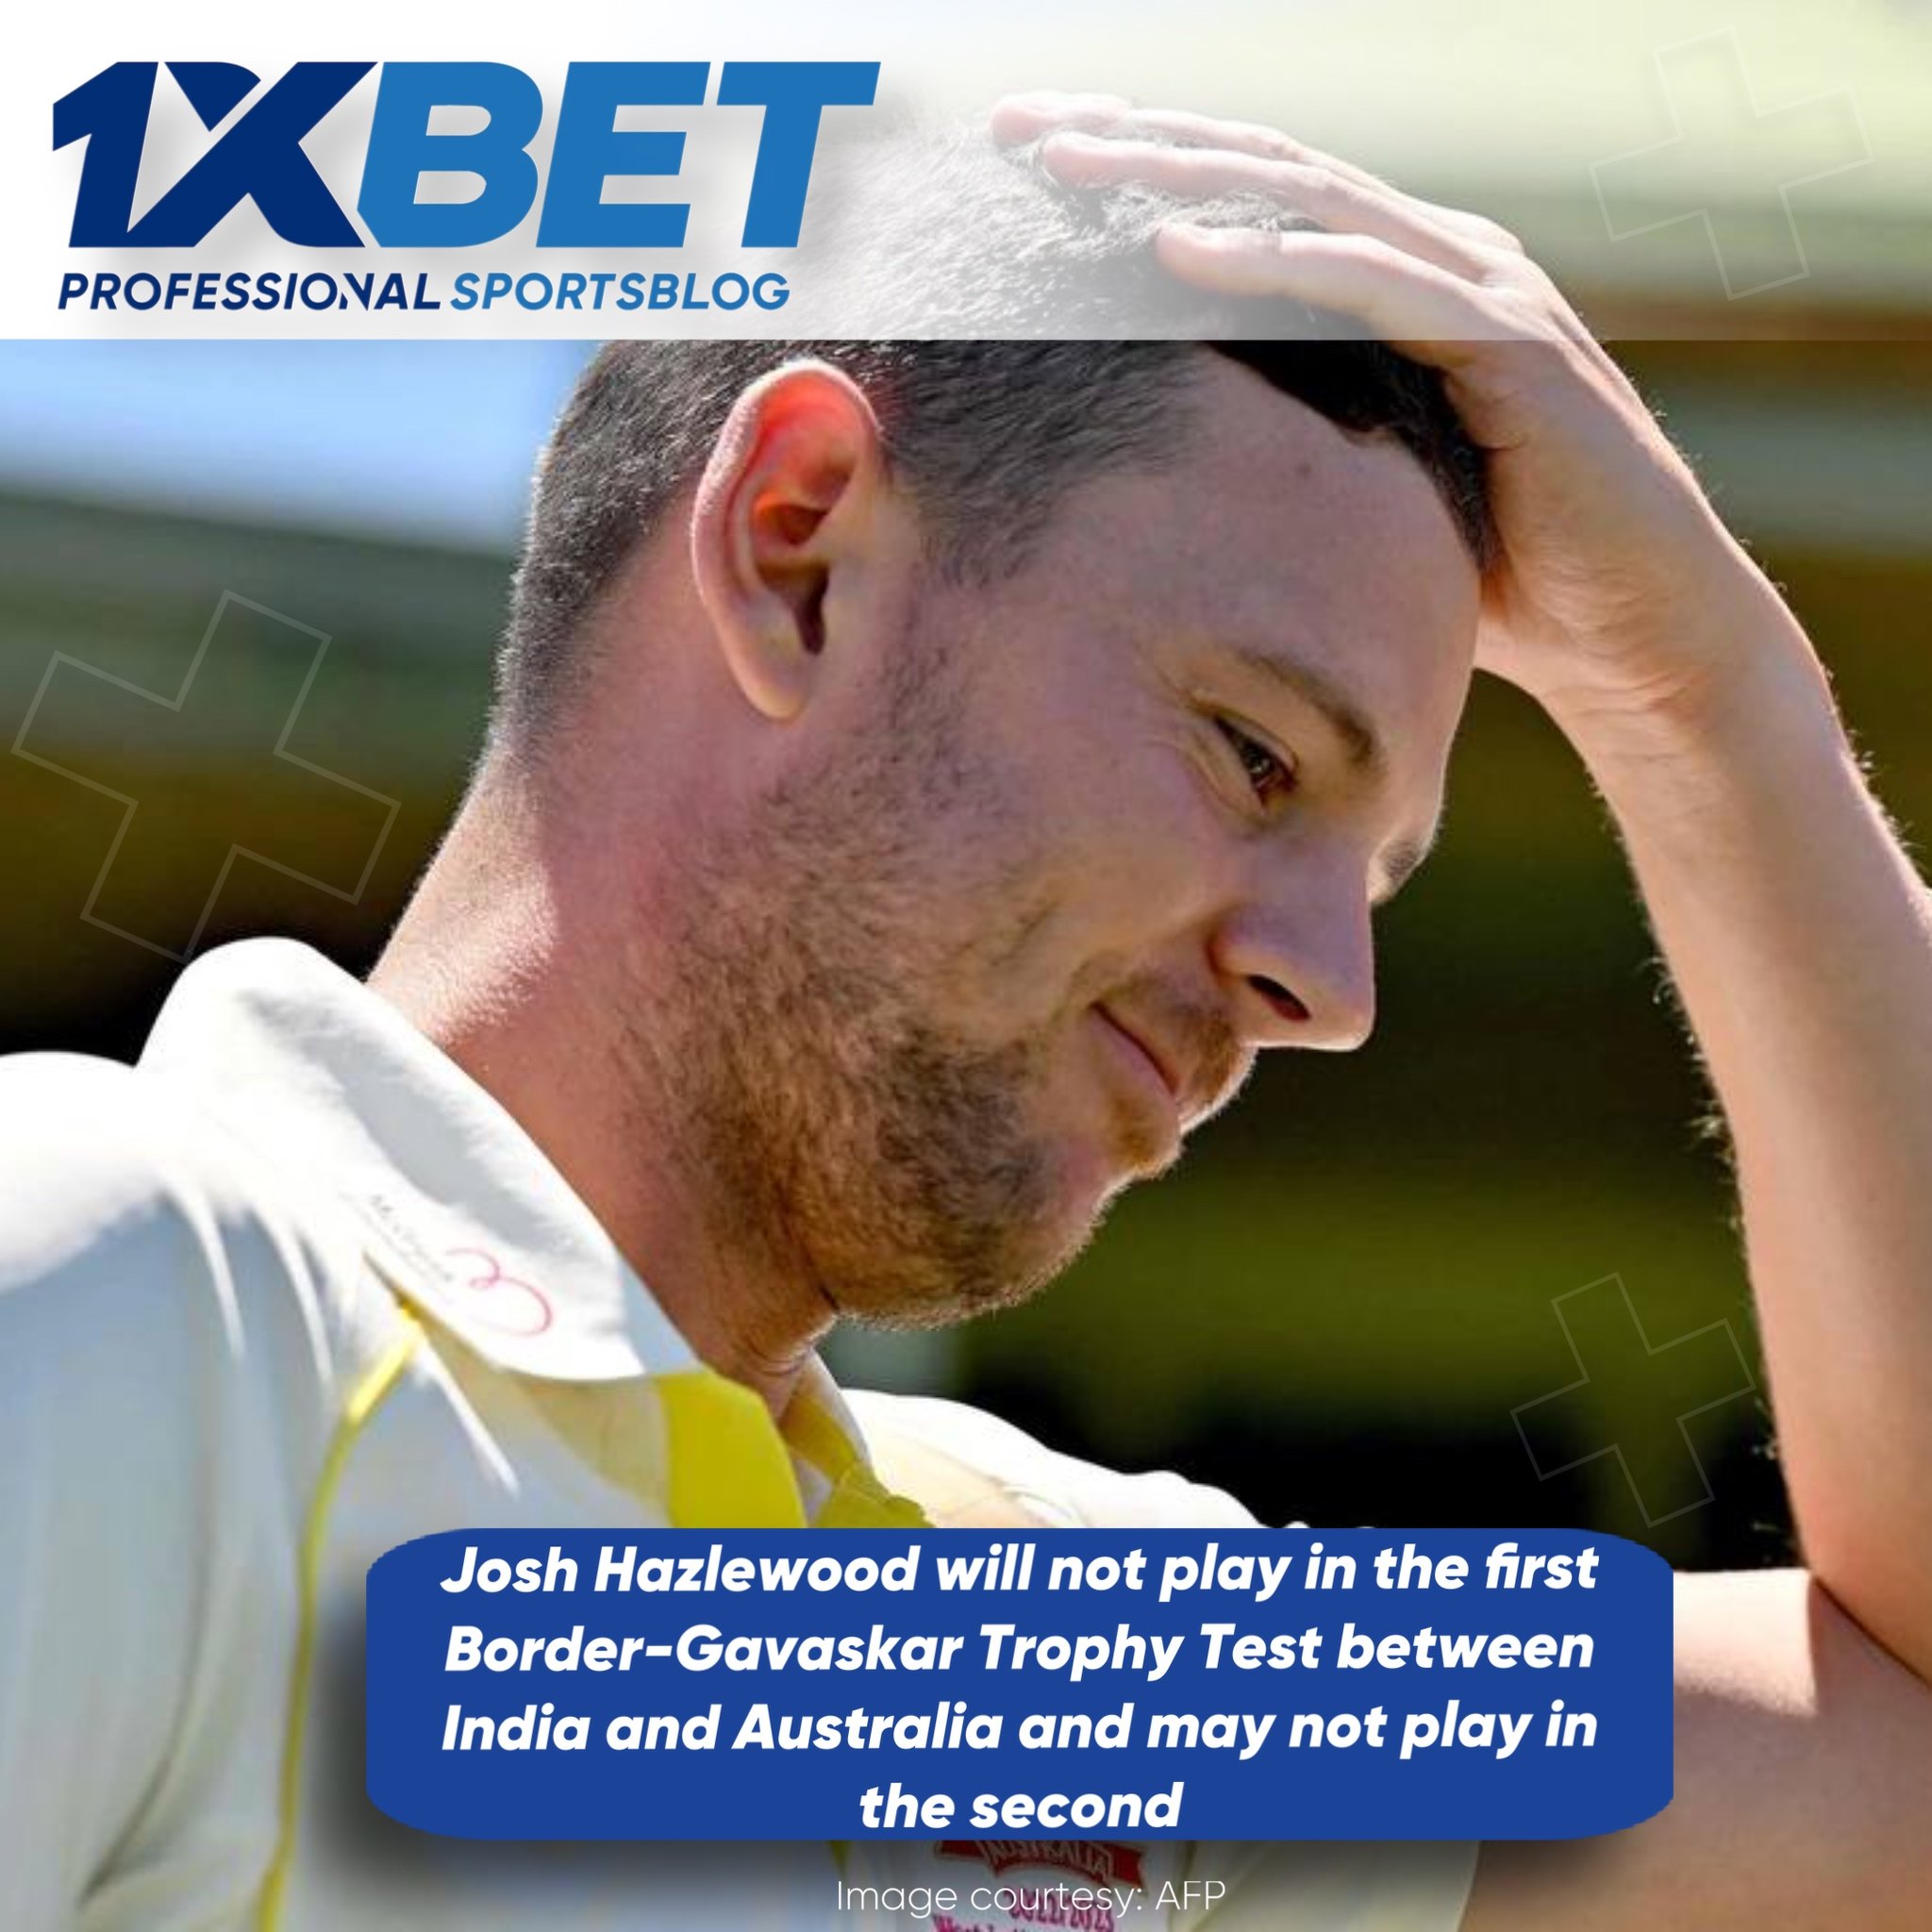 Josh Hazlewood will not play in the first Border-Gavaskar Trophy Test between India and Australia and may not play in the second